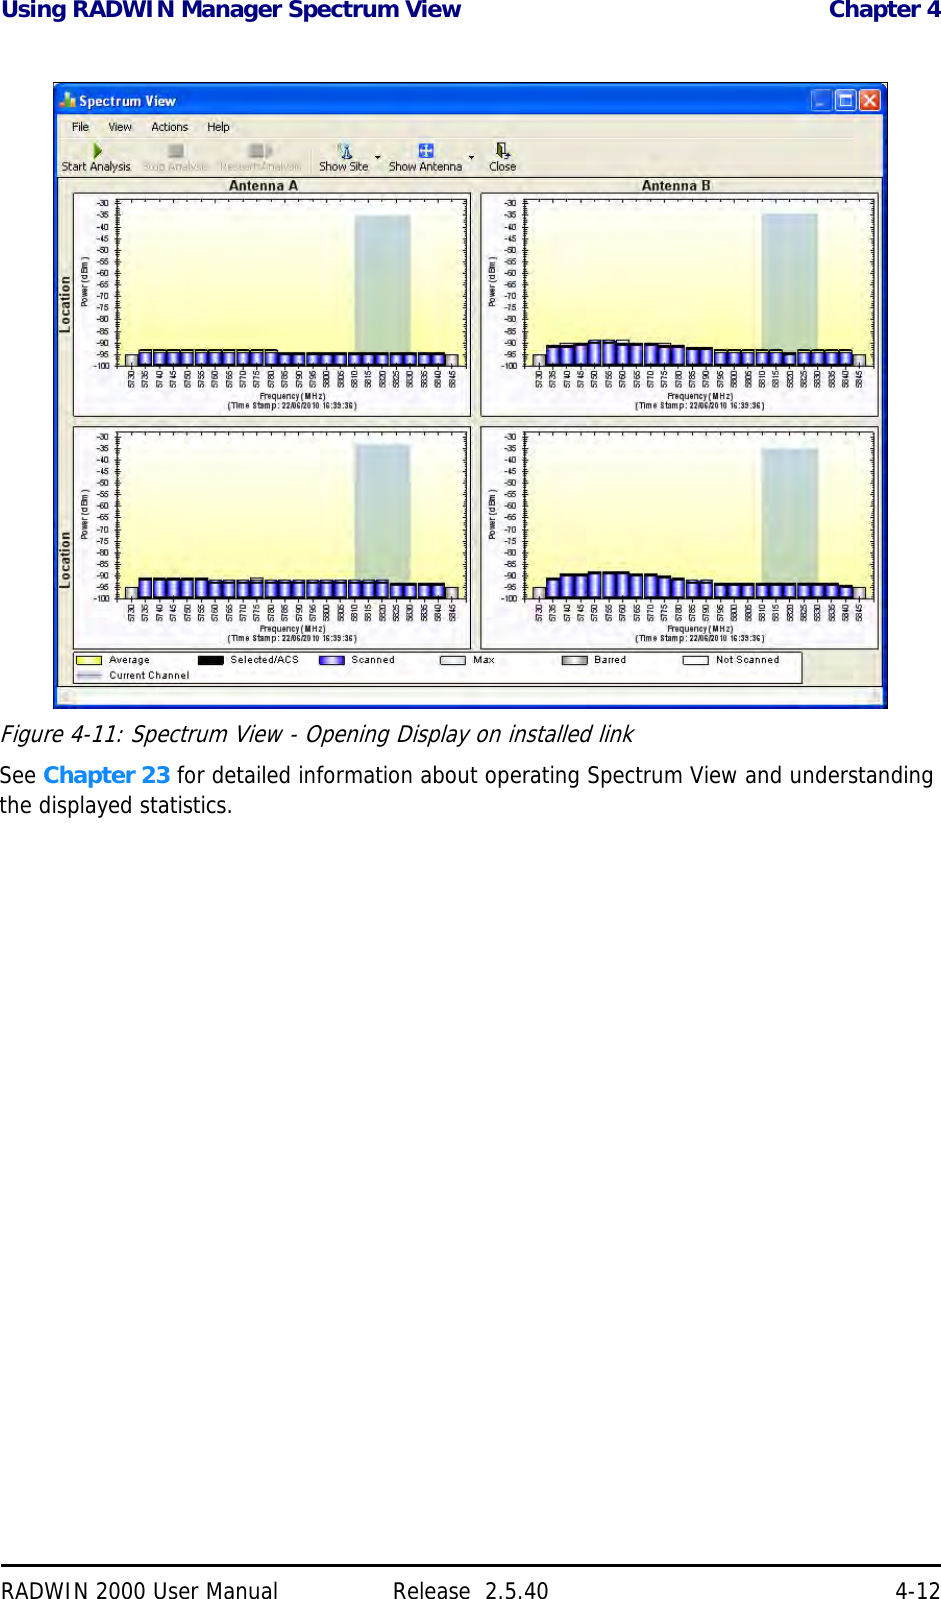 Using RADWIN Manager Spectrum View Chapter 4RADWIN 2000 User Manual Release  2.5.40 4-12Figure 4-11: Spectrum View - Opening Display on installed linkSee Chapter 23 for detailed information about operating Spectrum View and understanding the displayed statistics.  